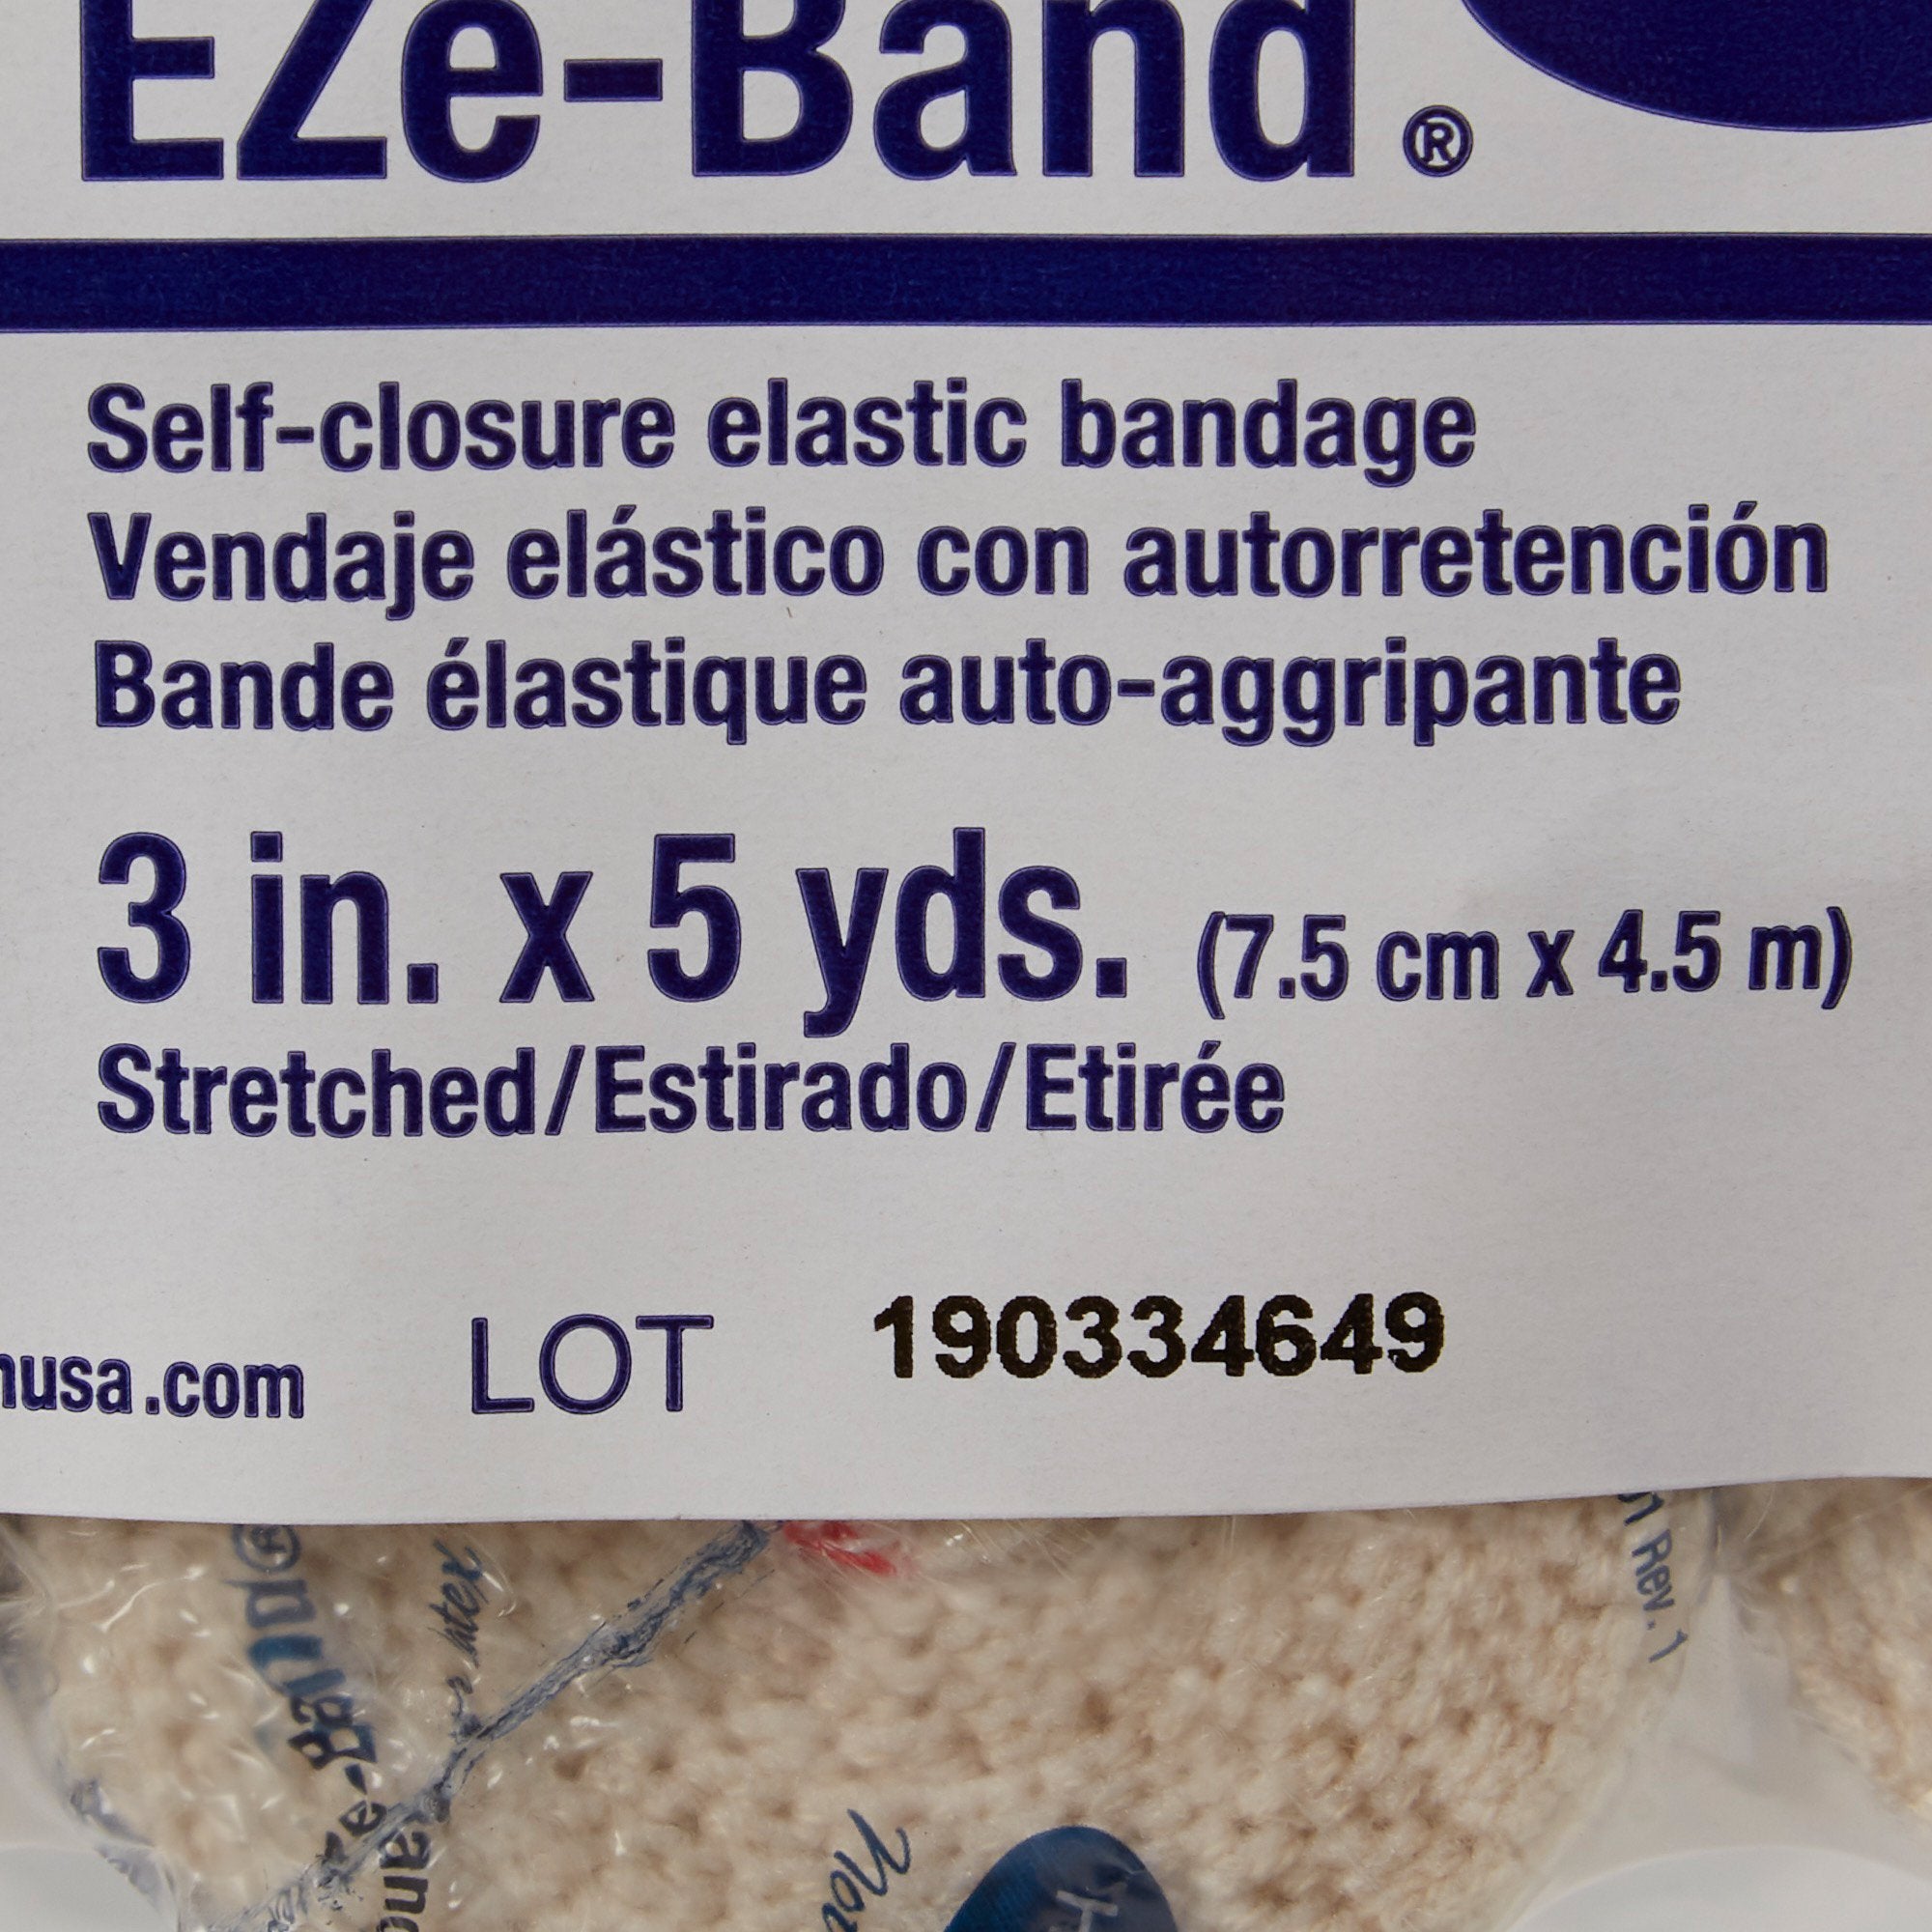 Elastic Bandage EZe-Band® LF 3 Inch X 5 Yard Double Hook and Loop Closure Tan NonSterile Standard Compression